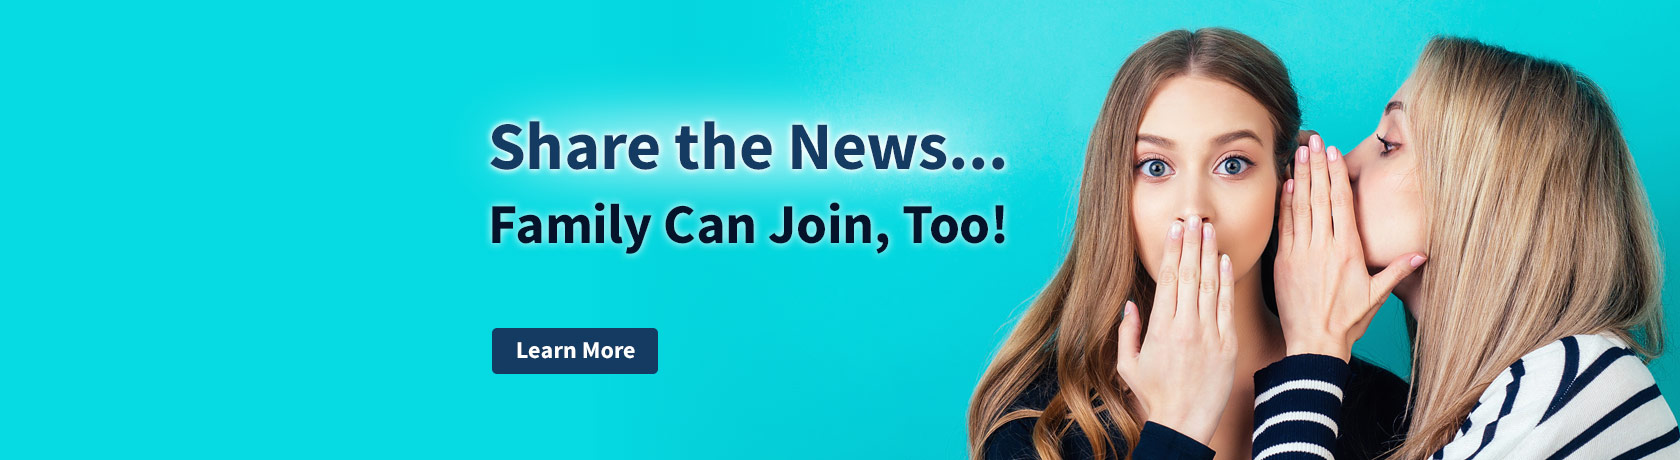 Share the News... Family Can Join, Too! Learn More